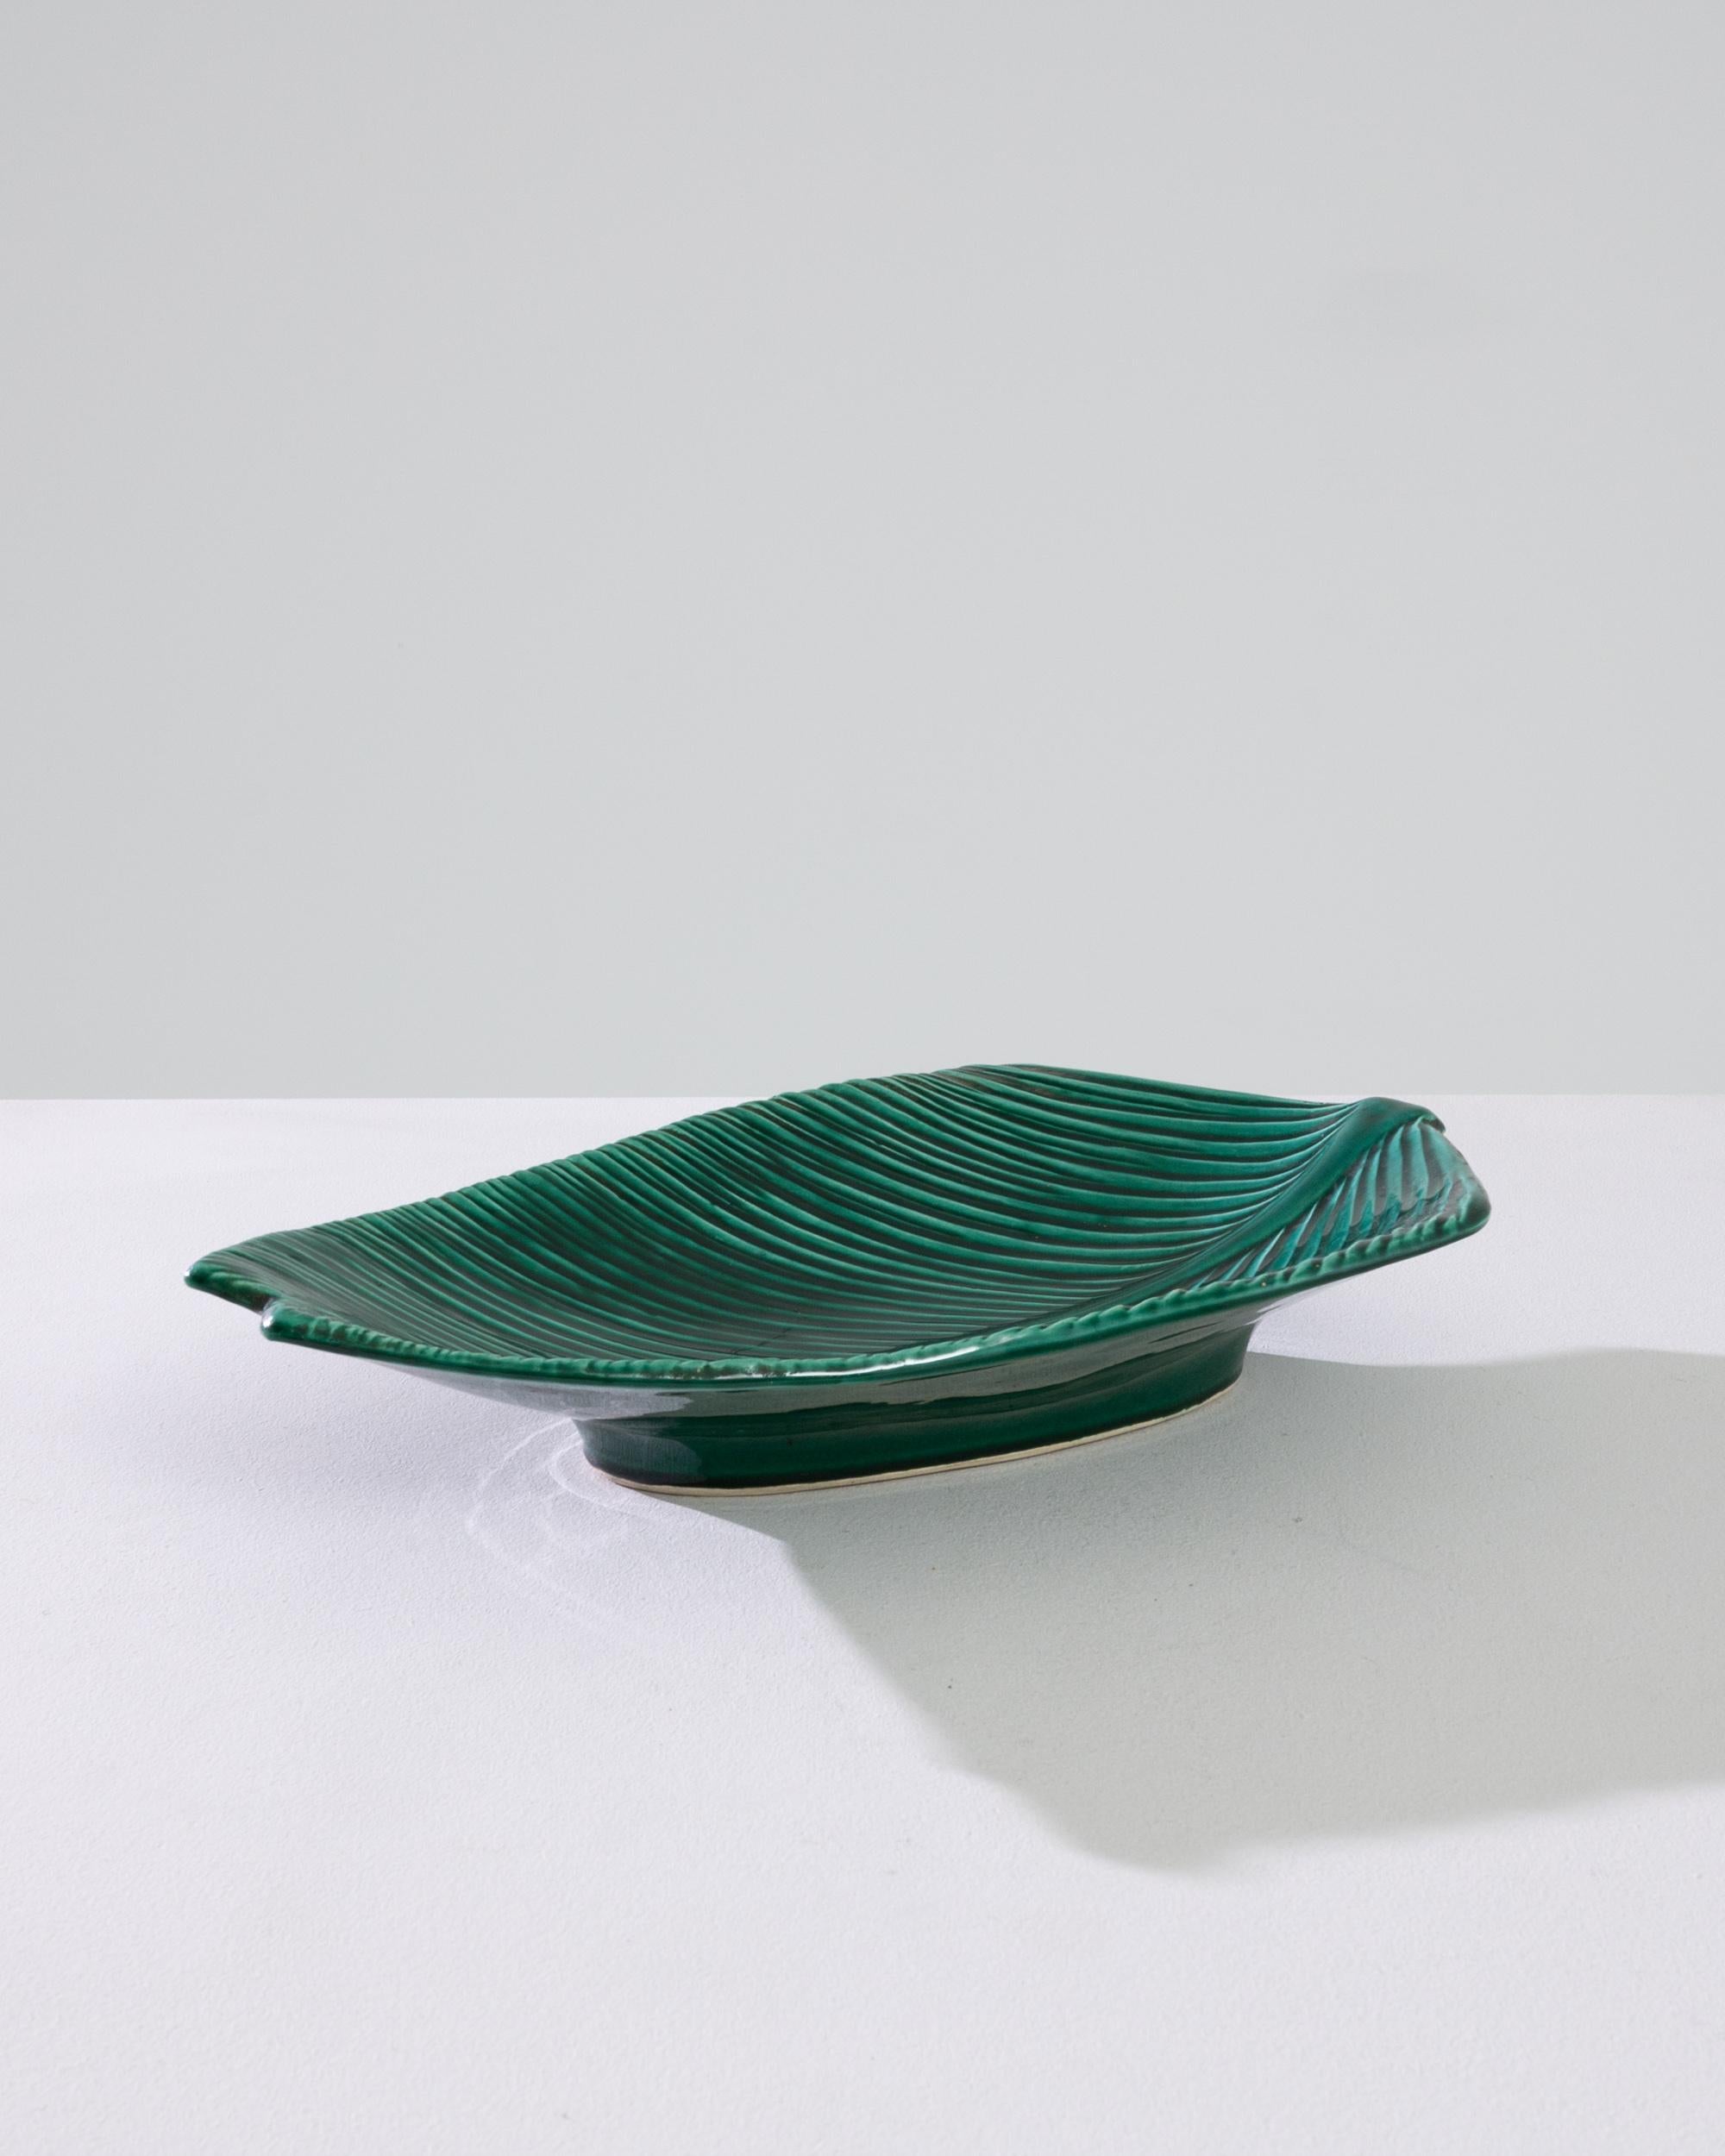 A ceramic plate from 1960s France in the shape of a leaf. A legend on the underside informs that this piece was made in Vallauris — a Mediterranean coastal town so famed for its pottery that Picasso went there to learn about ceramics. The